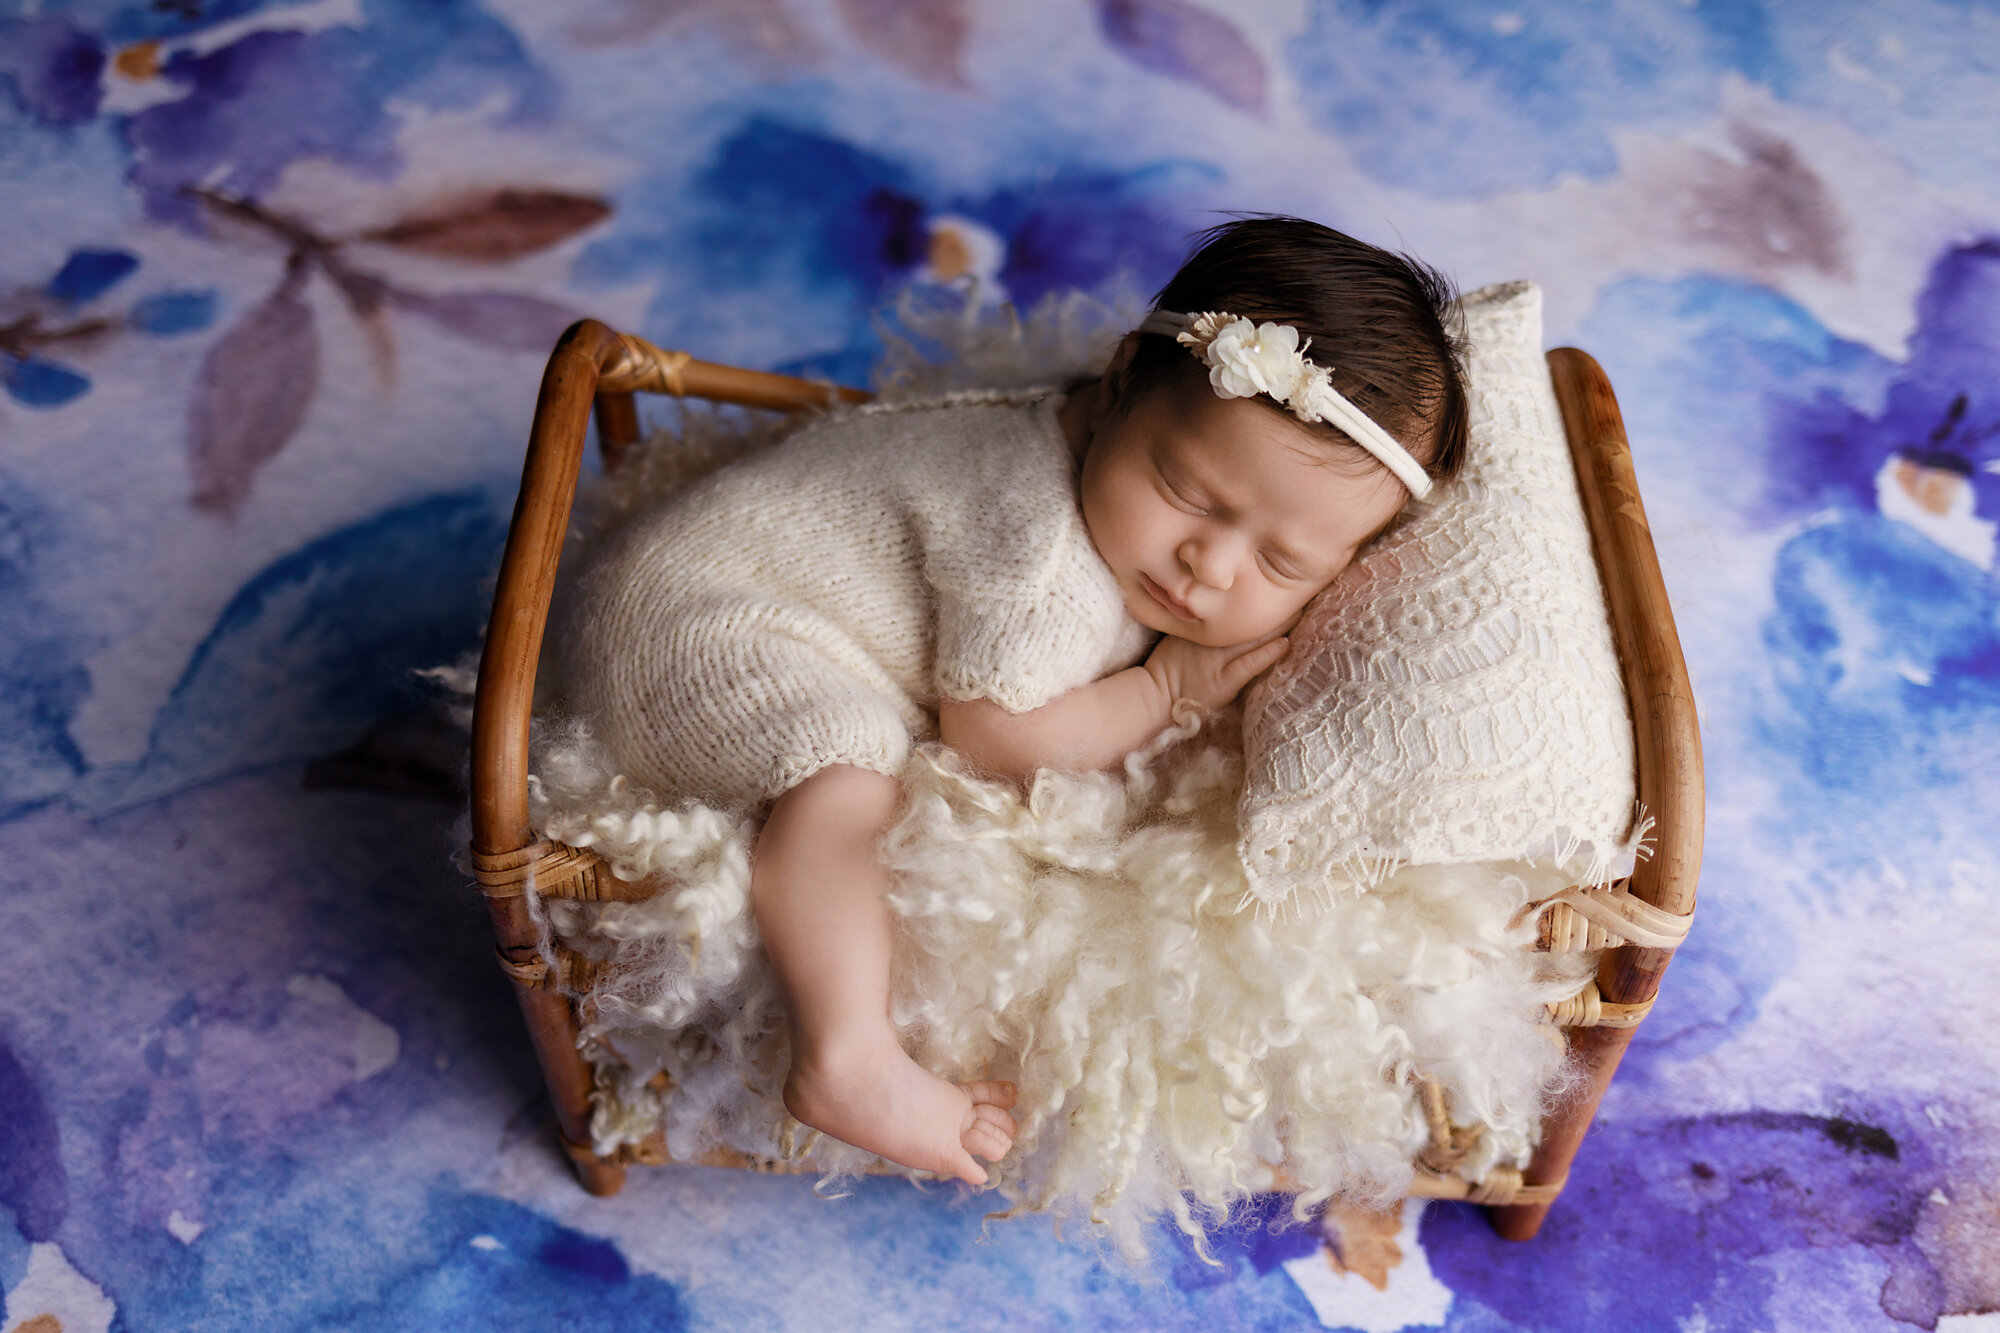 newborn girl sleeping on fluffy bed with blue floral background